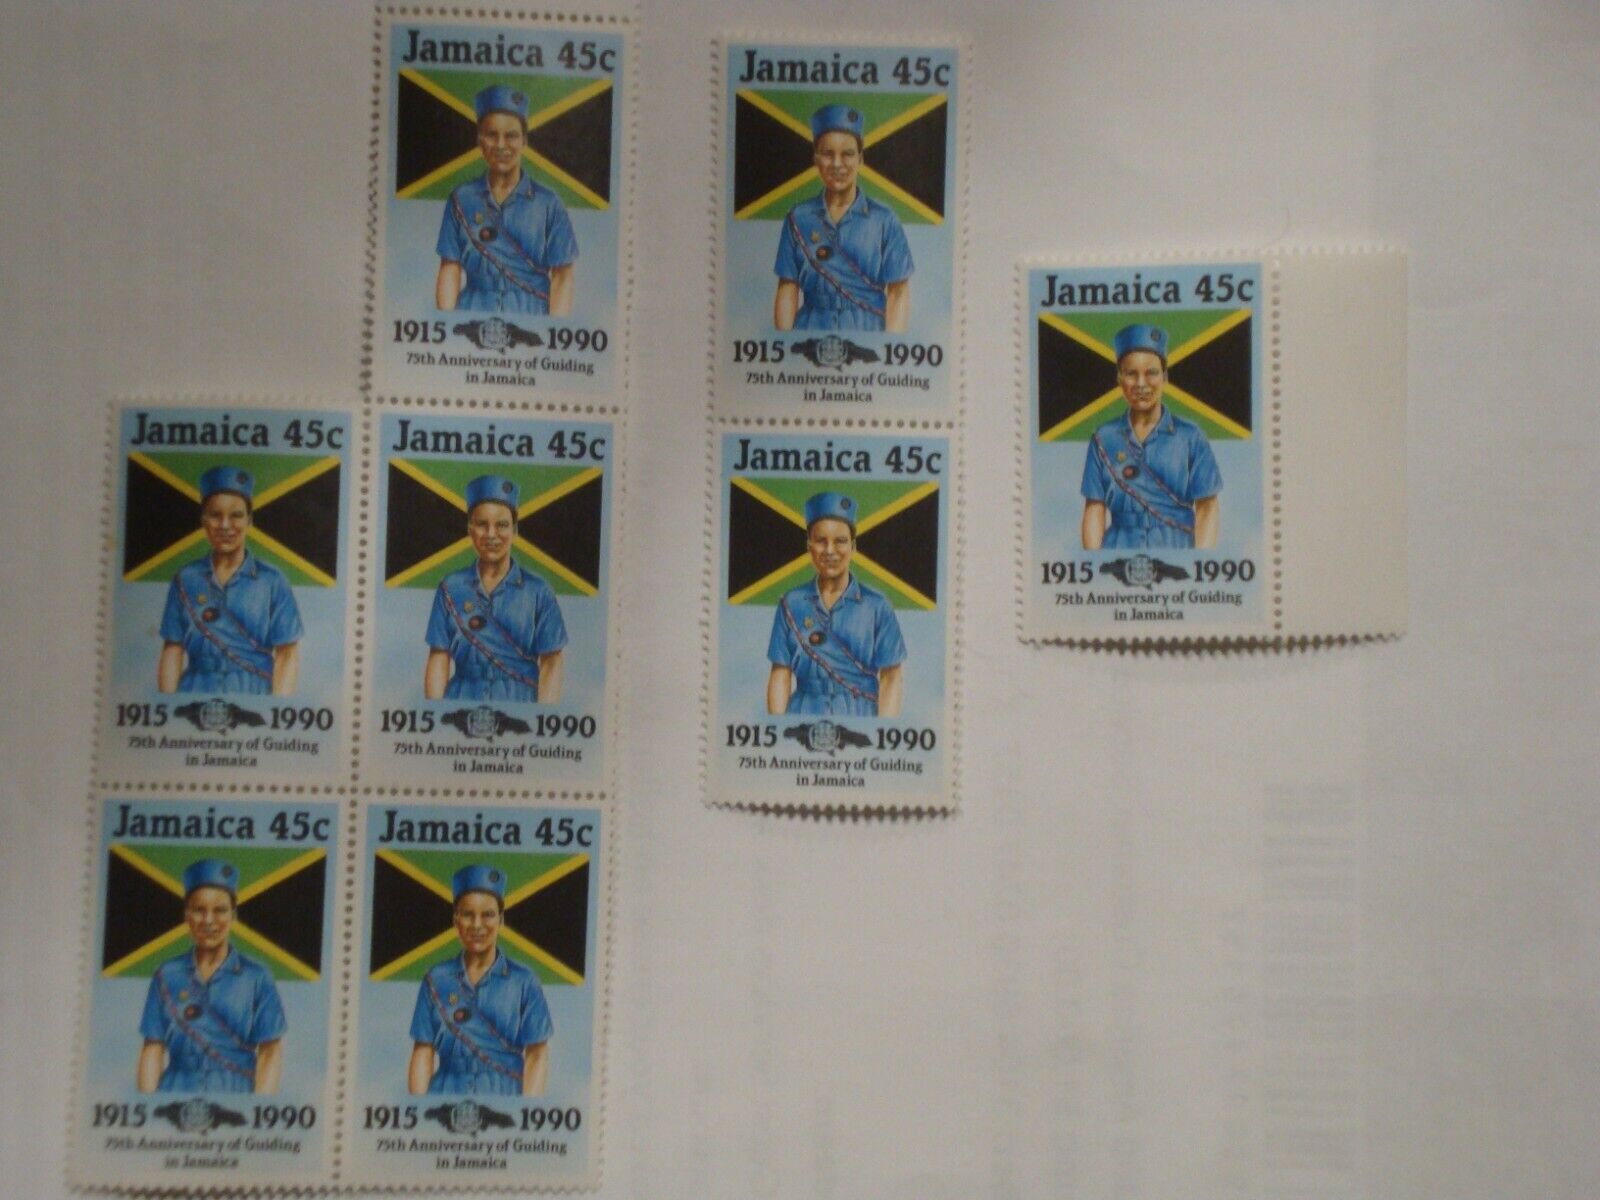 Jamaica Popular SG755 Girl Guides Max 85% OFF 45 cent stamps 1 as se 8 copies sold